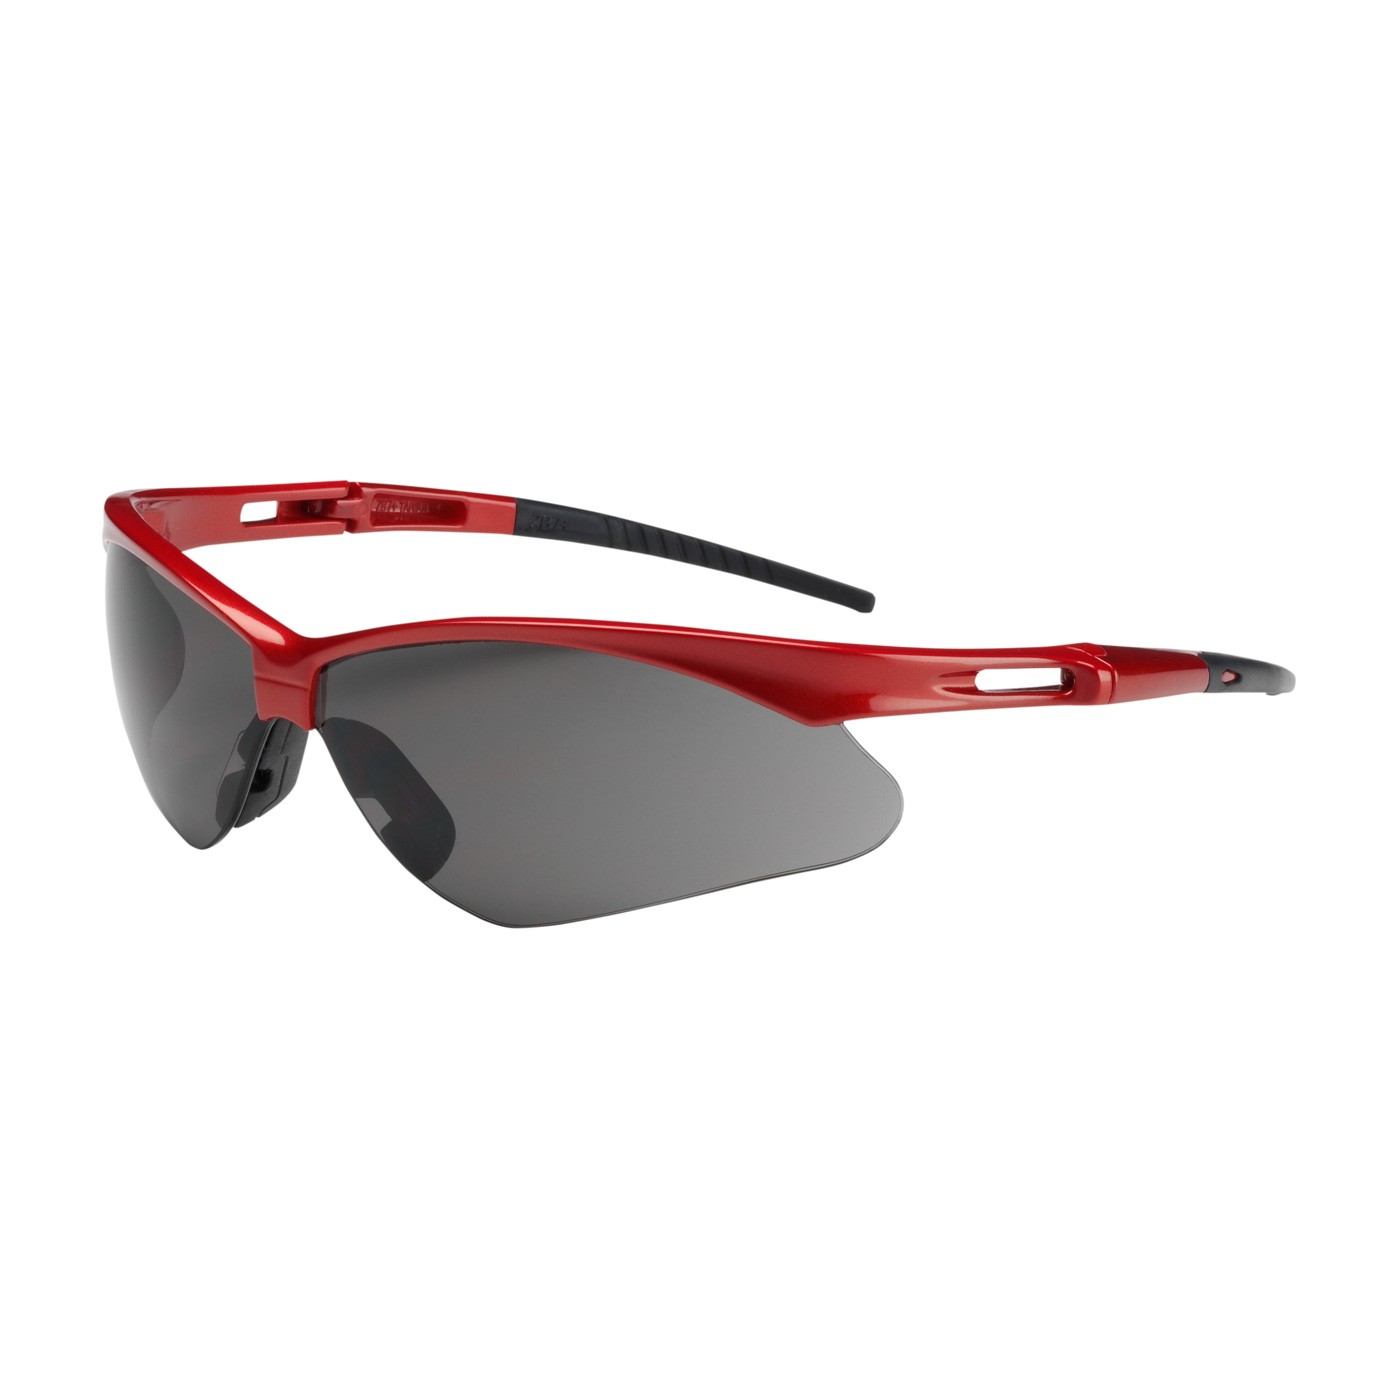 Anser™ Semi-Rimless Safety Glasses with Red Frame, Gray Lens and Anti-Scratch Coating  (#250-AN-10117)